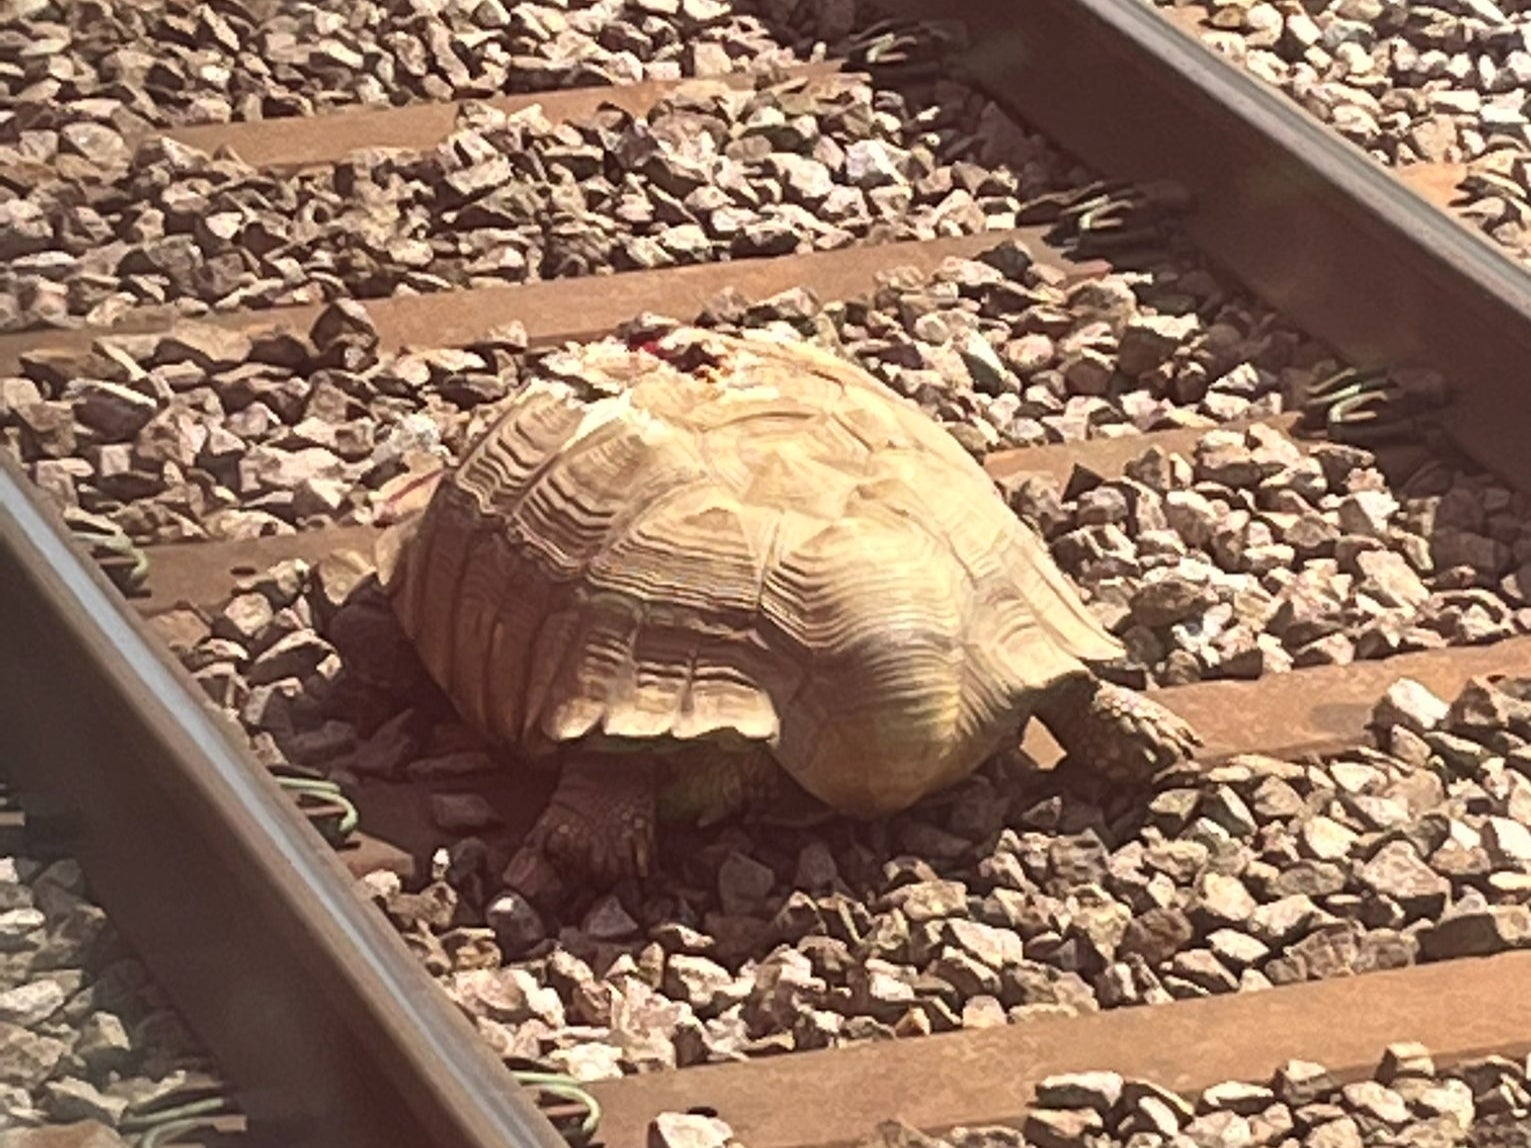 The giant tortoise weighs 60kg and measures at 76cm, and had to be lifted 400m to 500m down the track to safety by four rail workers